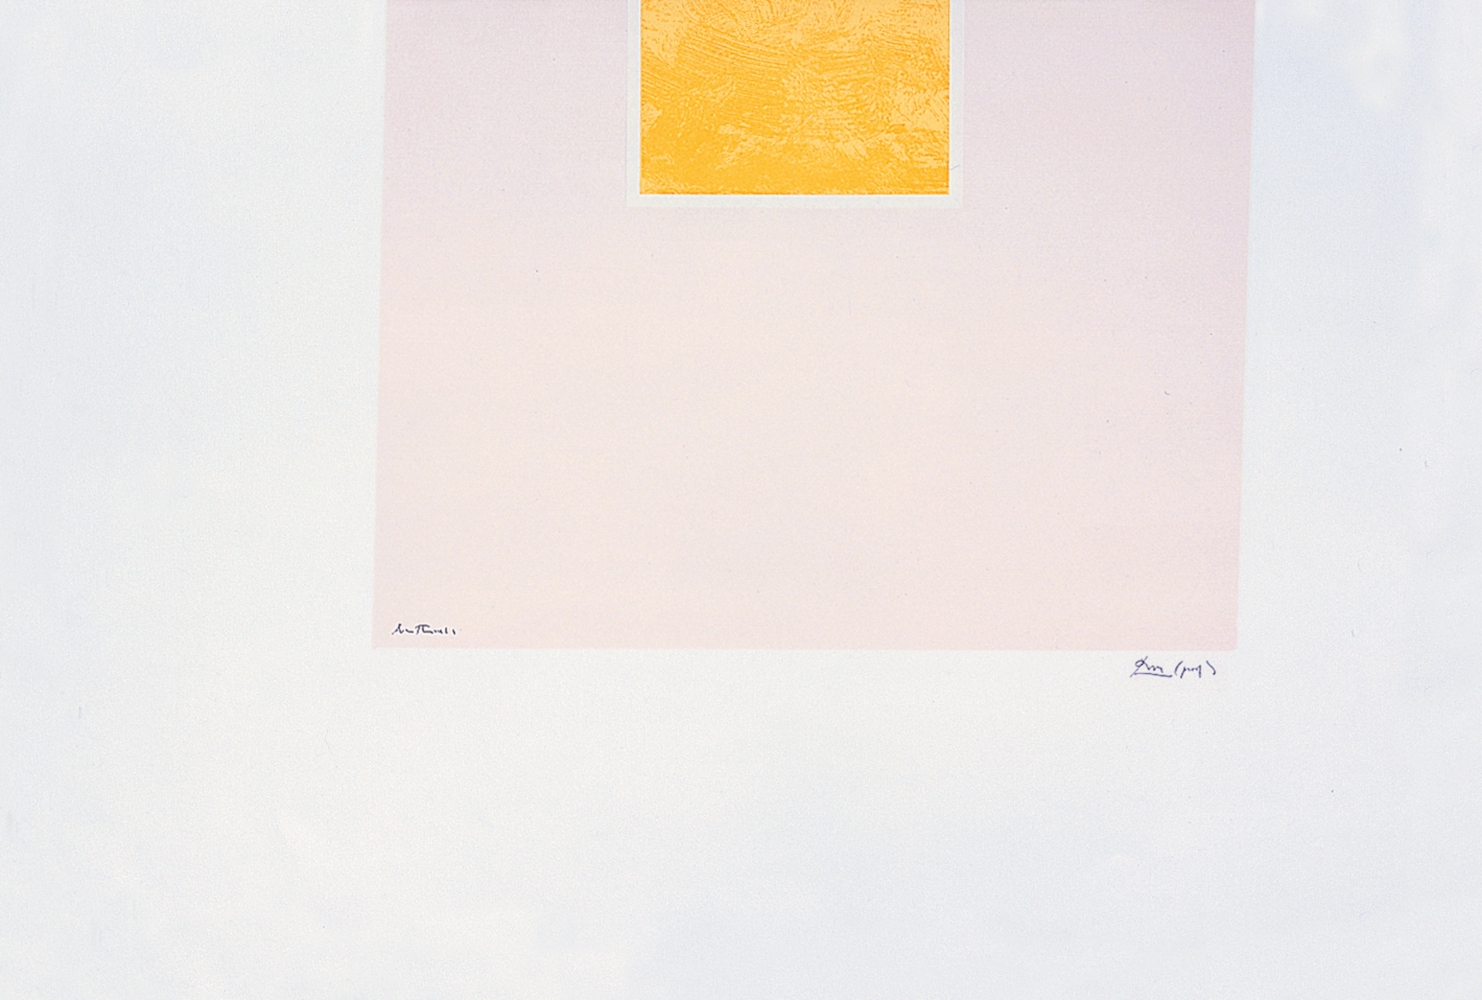 London Series II: Untitled (Orange/Pink), 1971, screenprint on white J.B. Green mould-made Double Elephant paper, edition of 150